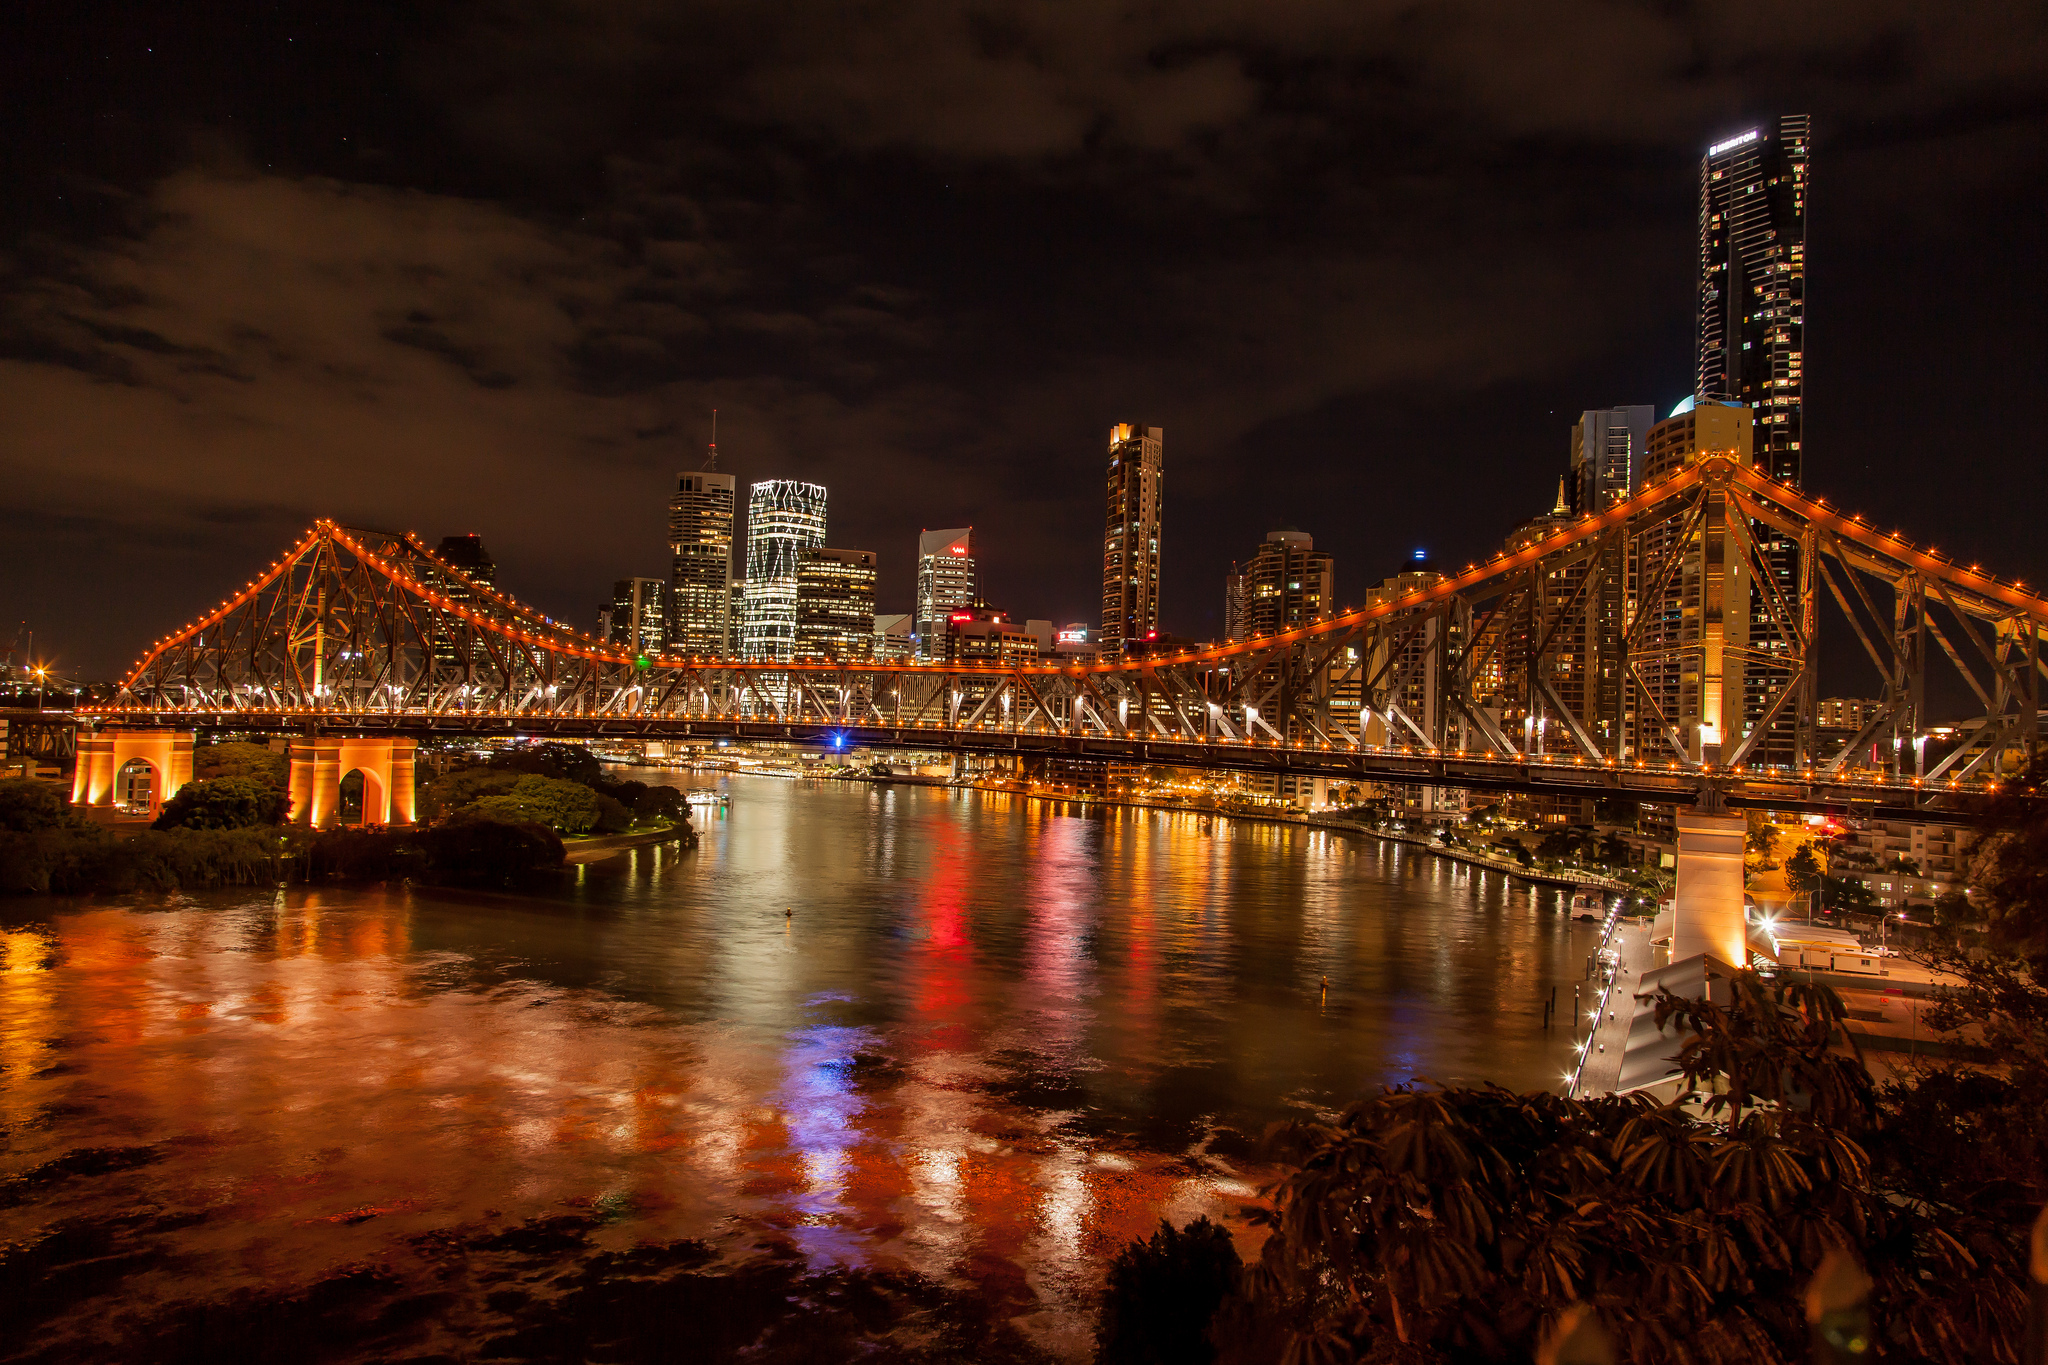 famous tourist attractions in brisbane